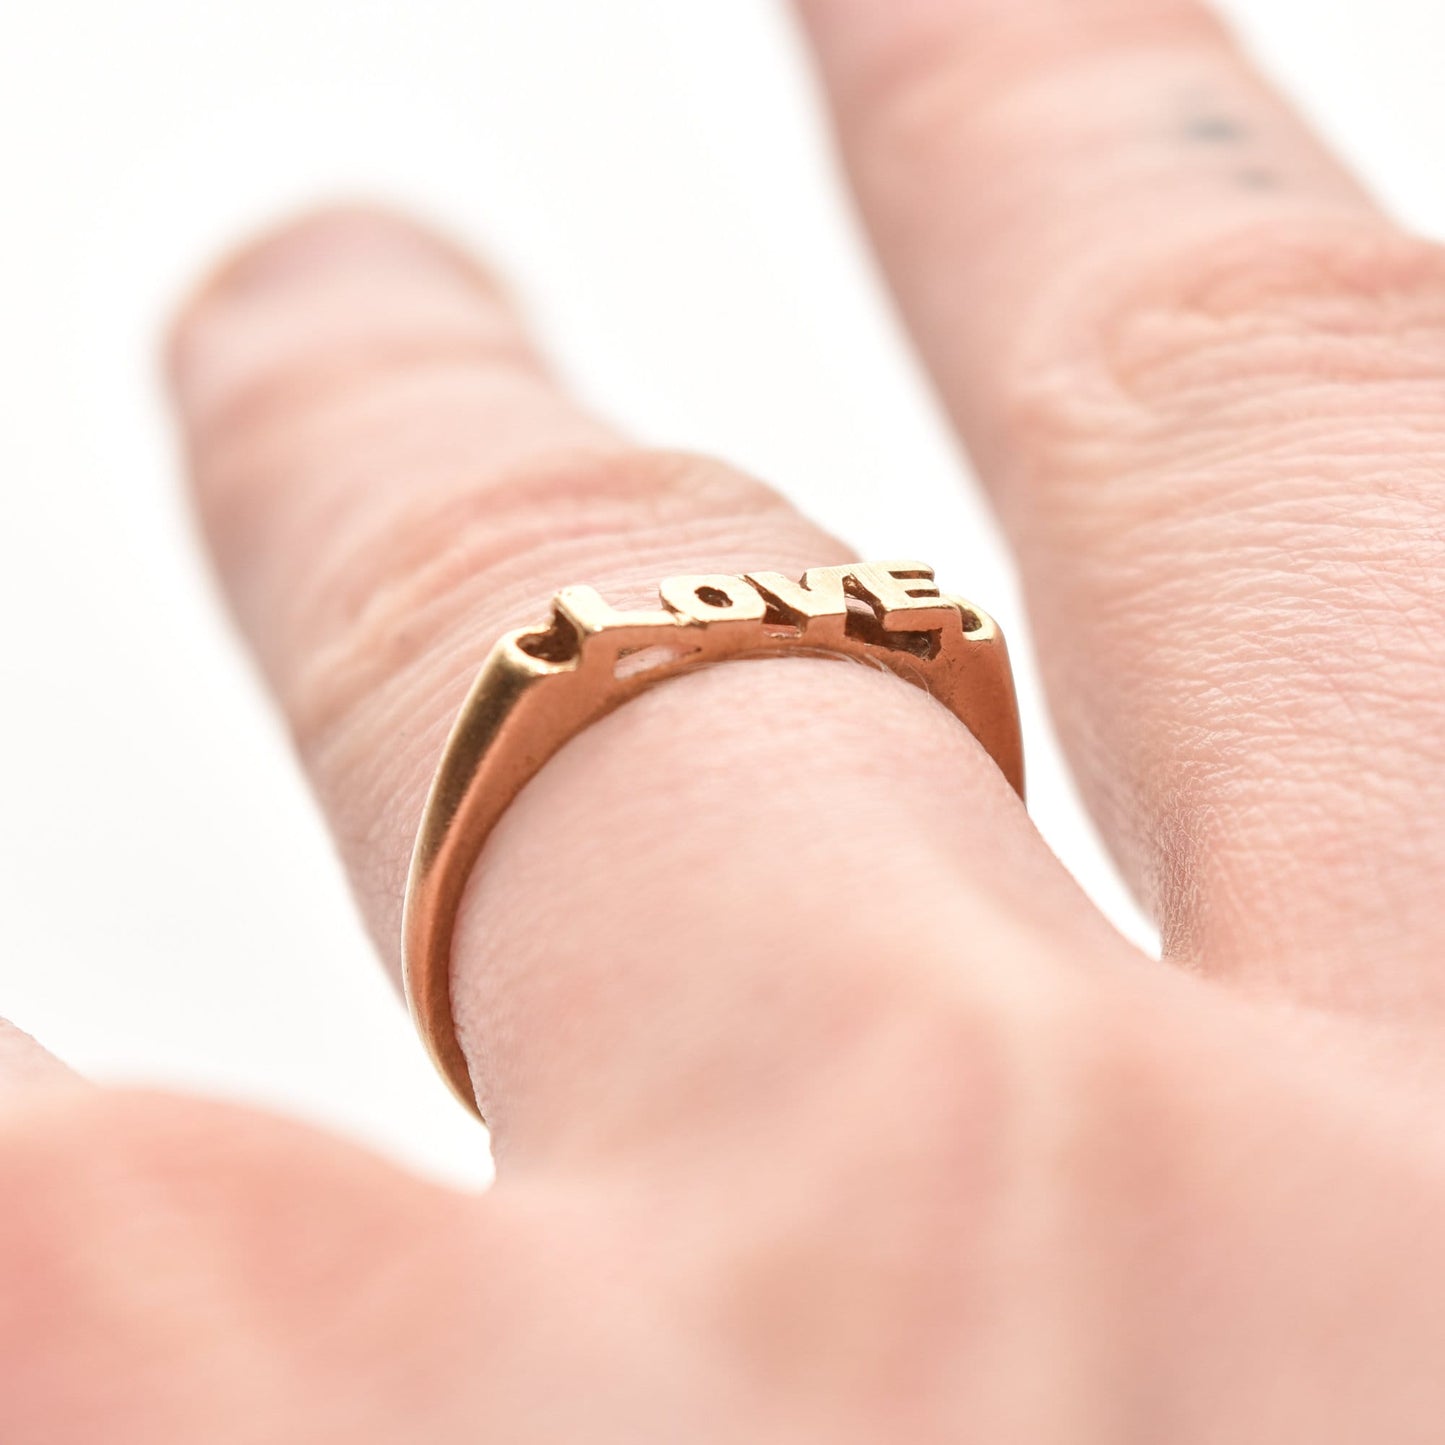 Minimalist 14K yellow gold 'LOVE' ring on finger, cute gold stacking ring for Valentine's Day gift, size 6.75 US